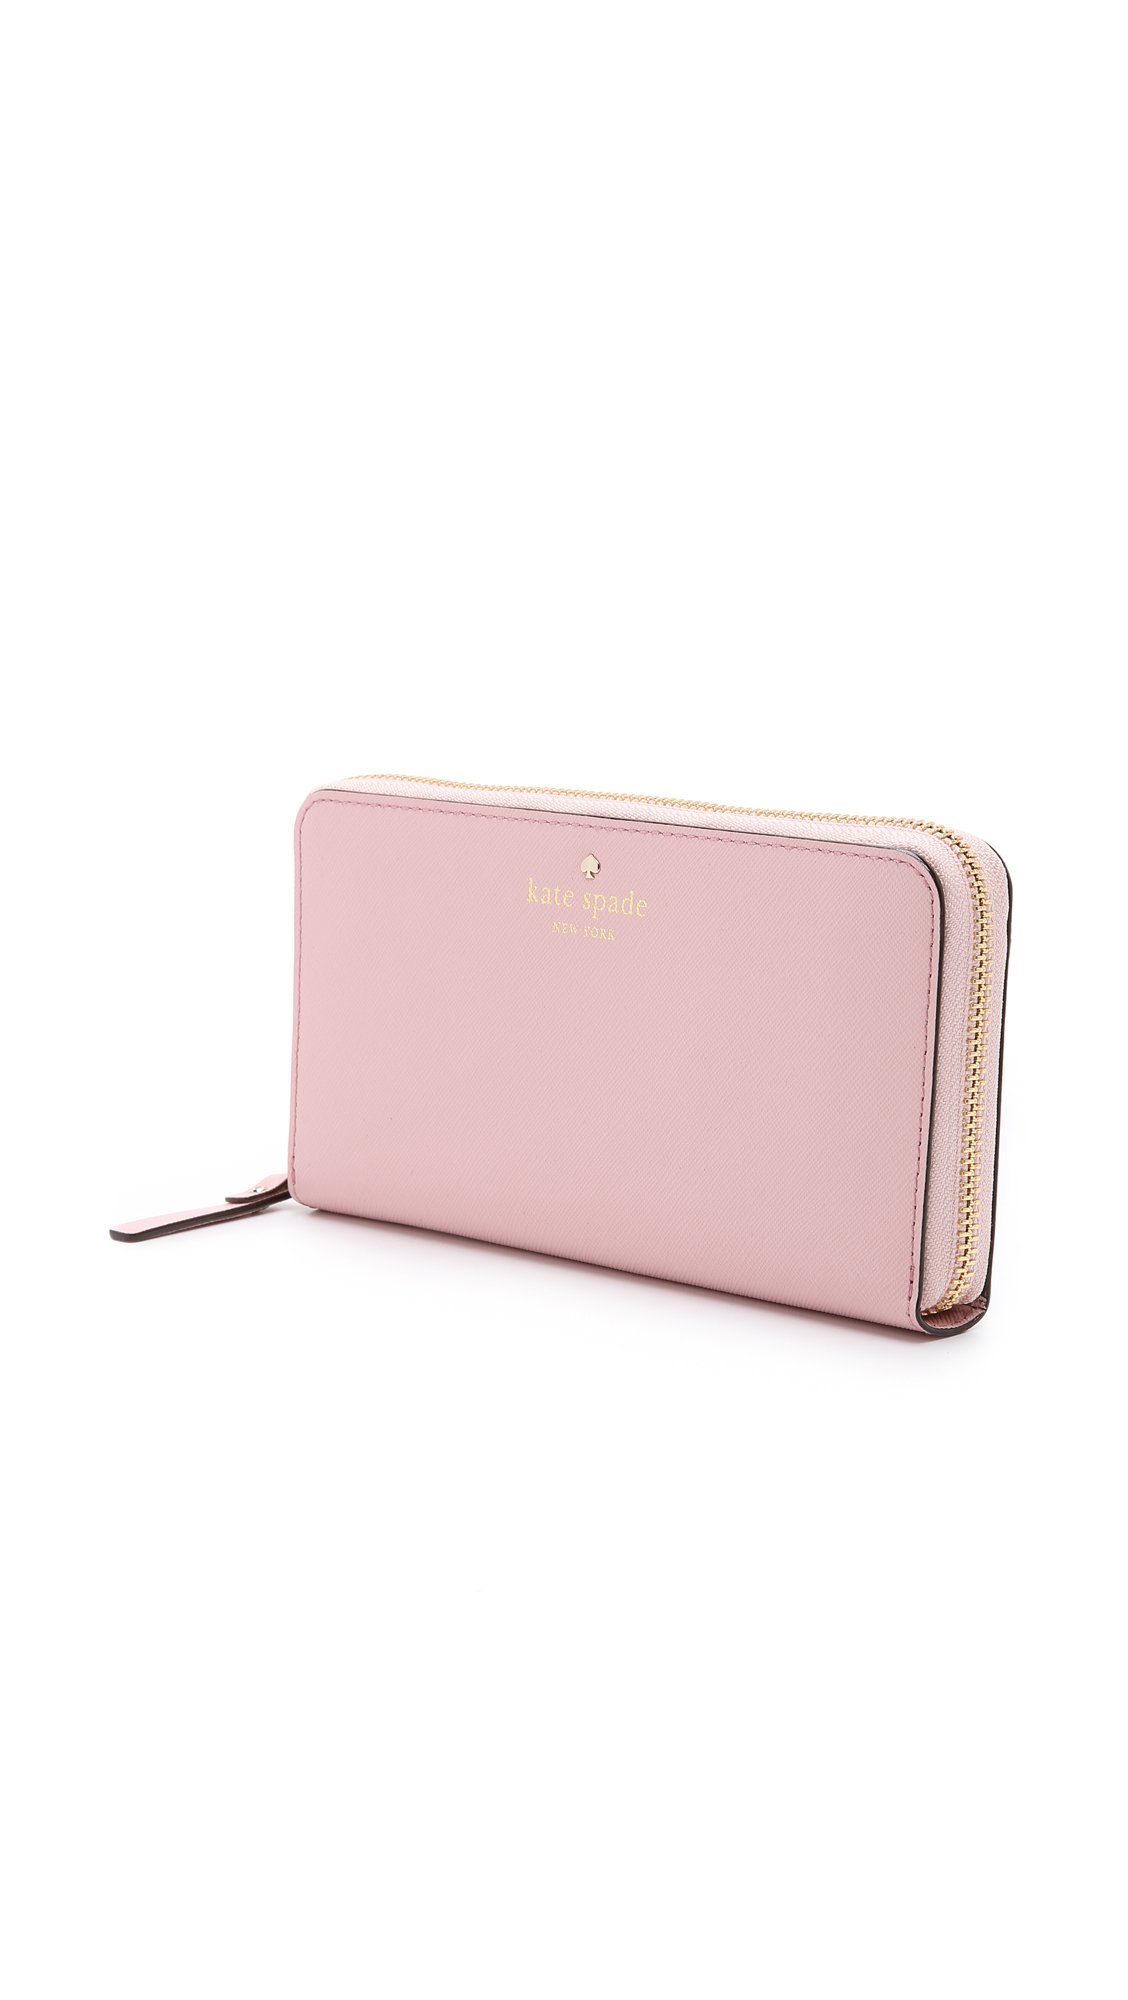 Kate Spade Lacey Zip Around Wallet in Pink | Lyst